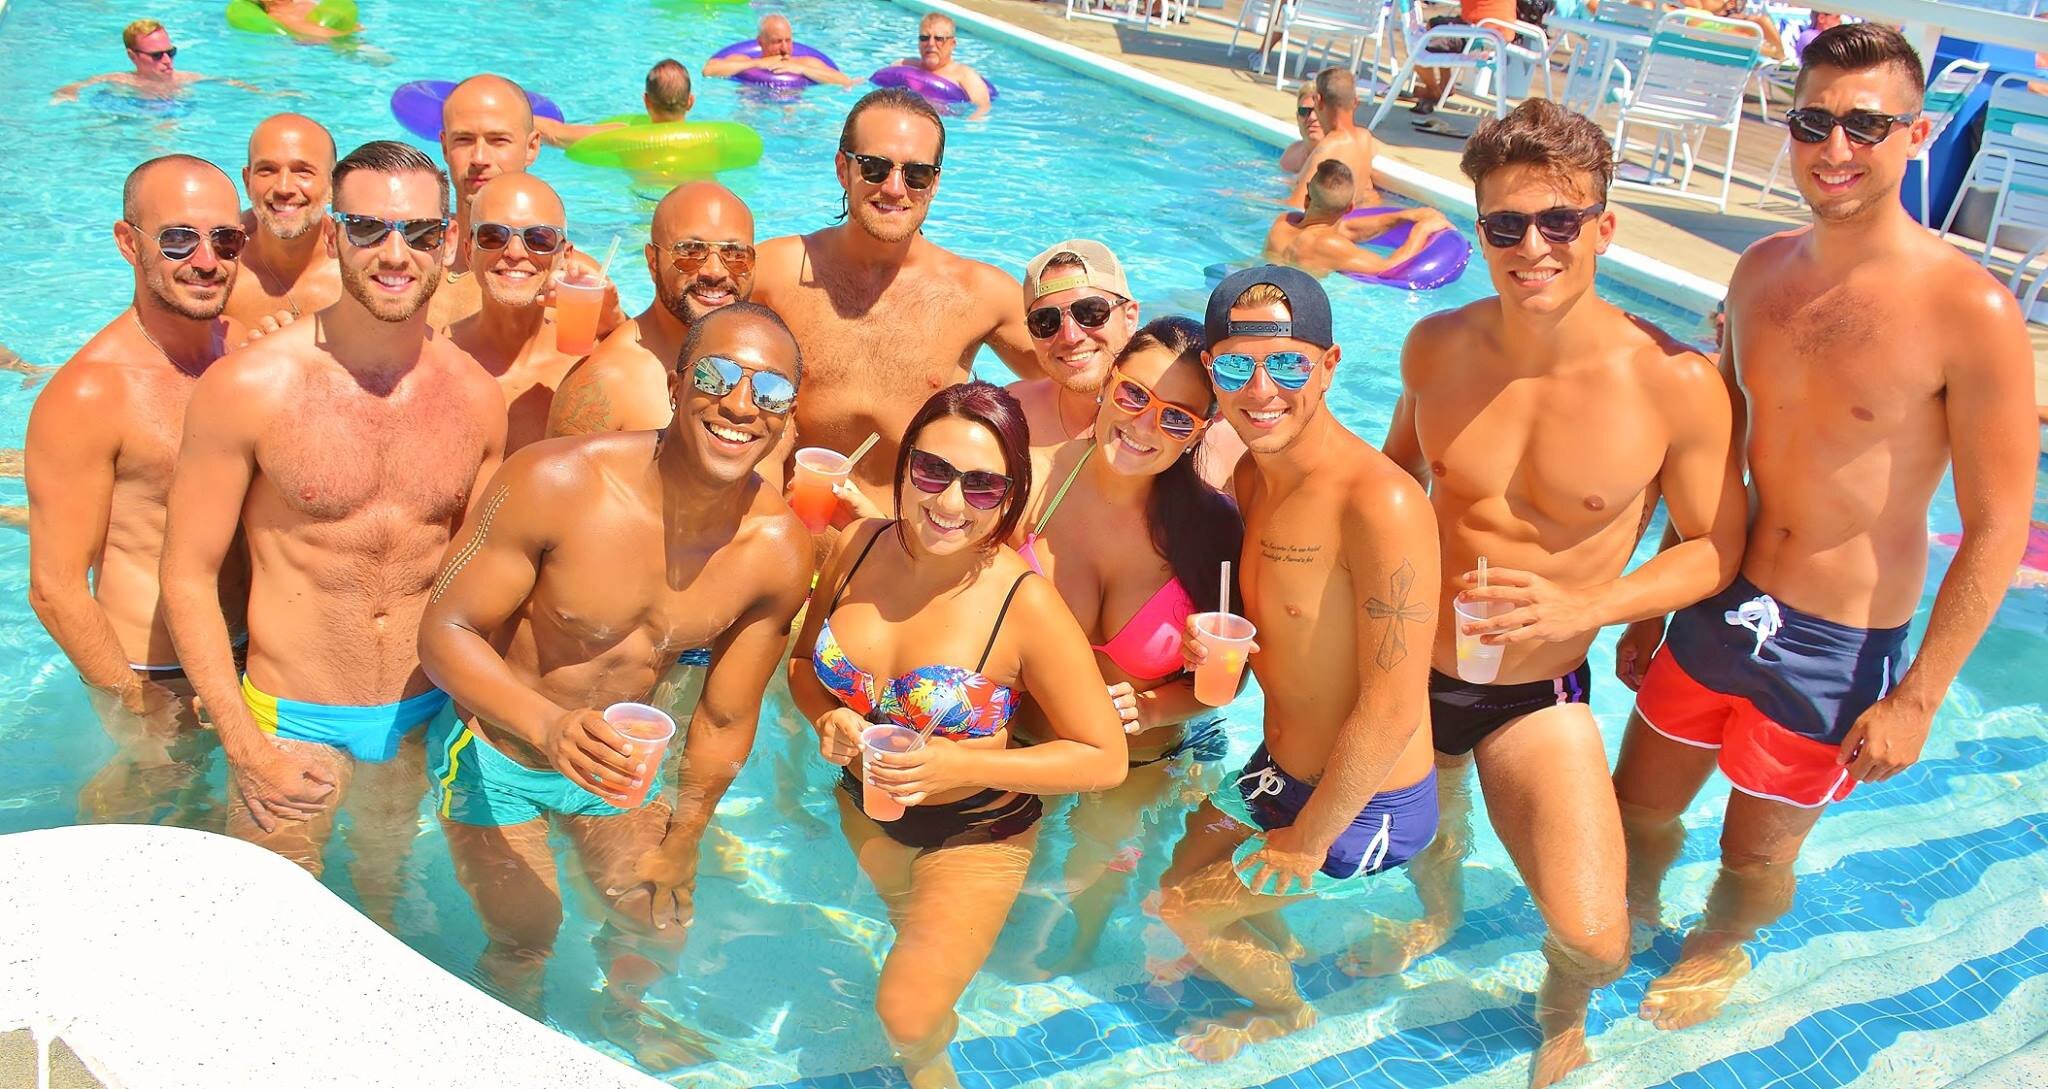 mixed group in the pool-boys and girls.jpg